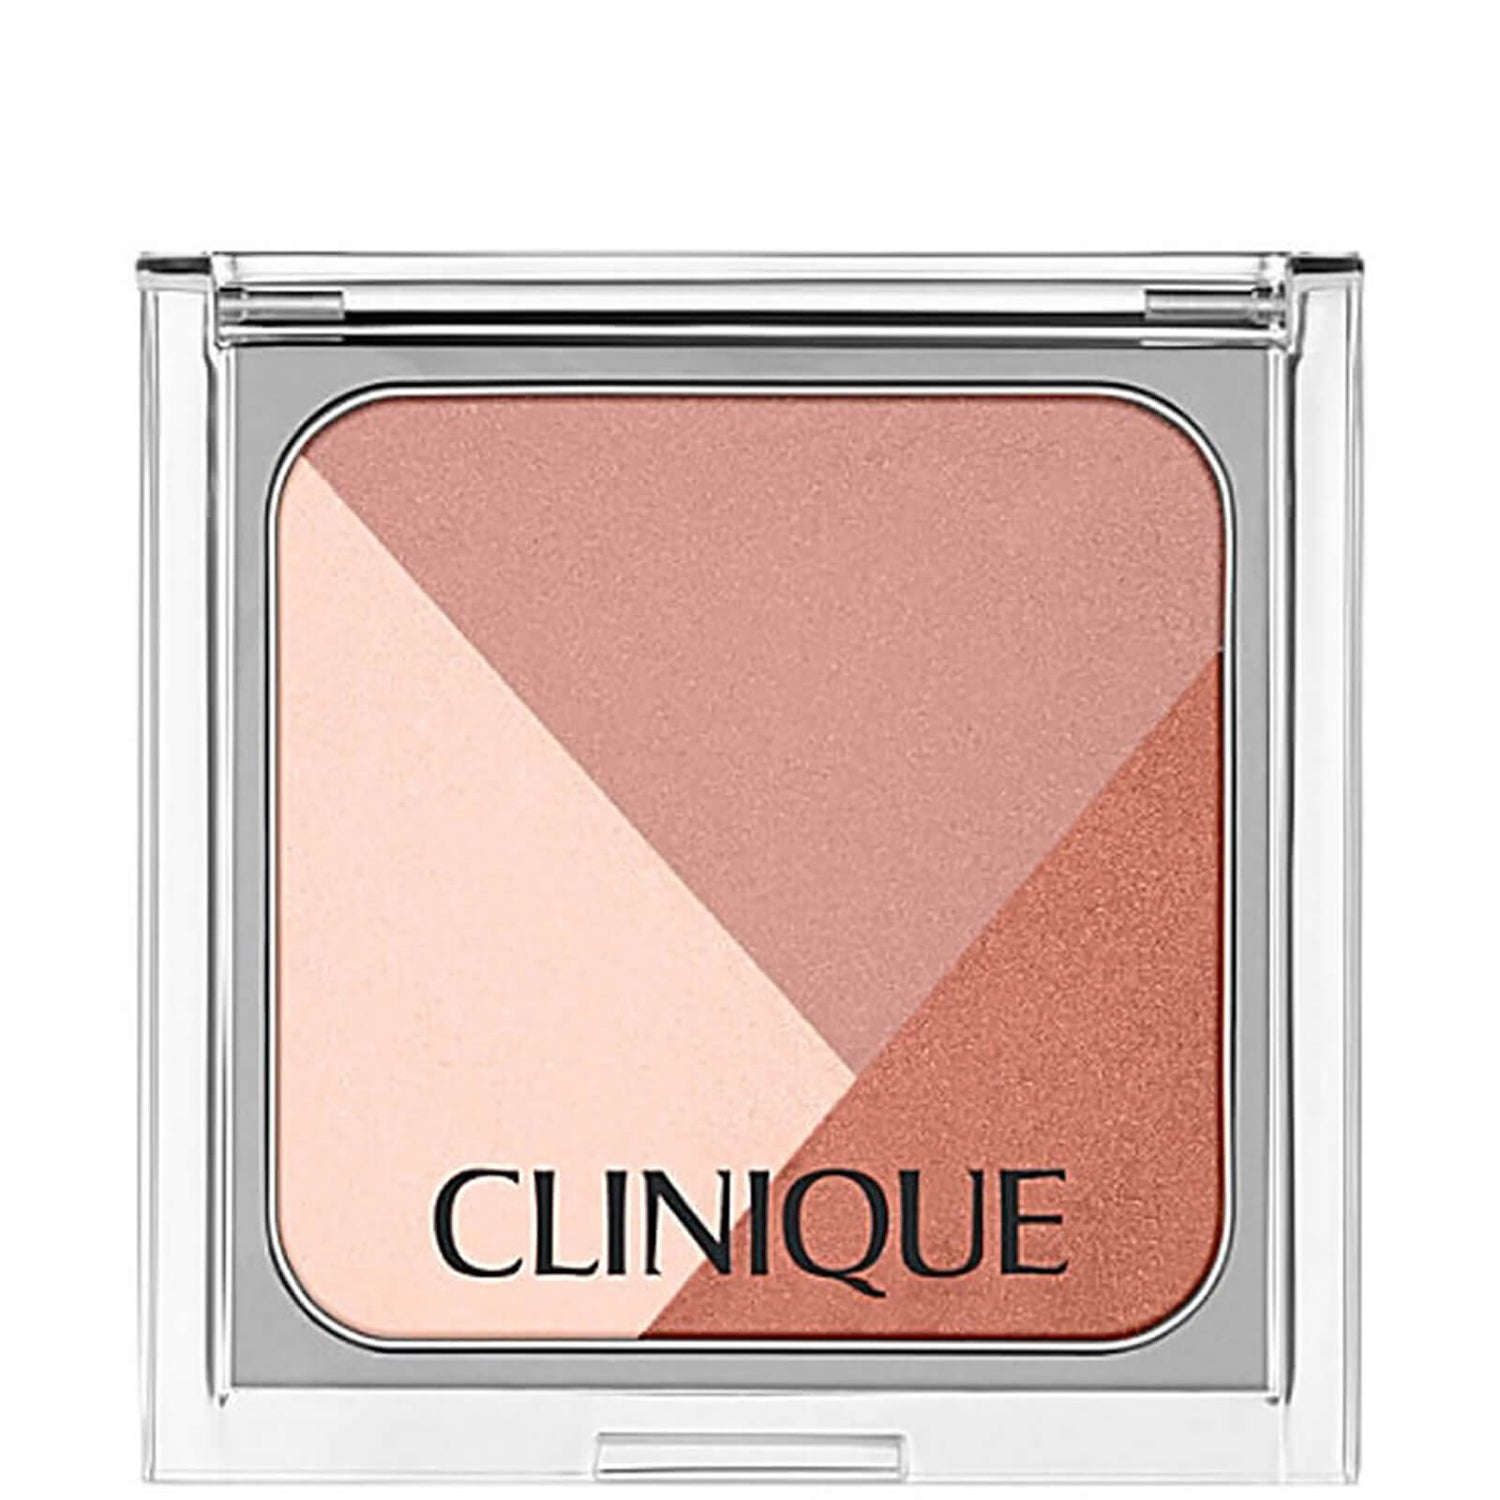 Clinique Sculptionary Cheek Contouring Palette -poskiväripaletti, Defining Nudes